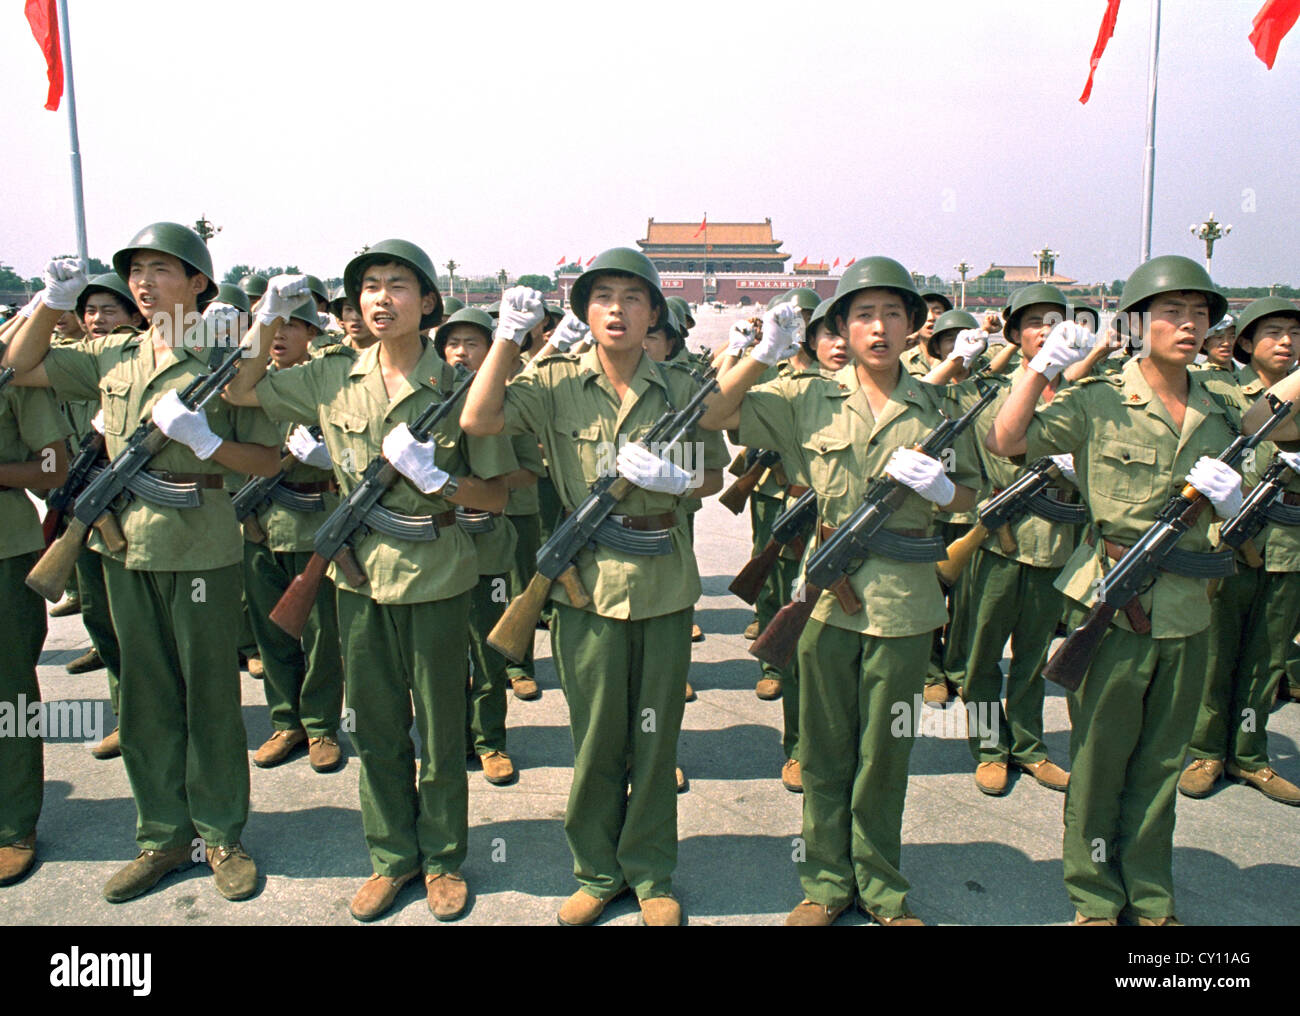 People's Liberation Army soldiers take an oath to the communist party in Tiananmen Square July 2, 1989 in Beijing, China. The oath is required by all military following the crackdown on democracy protesters. Stock Photo